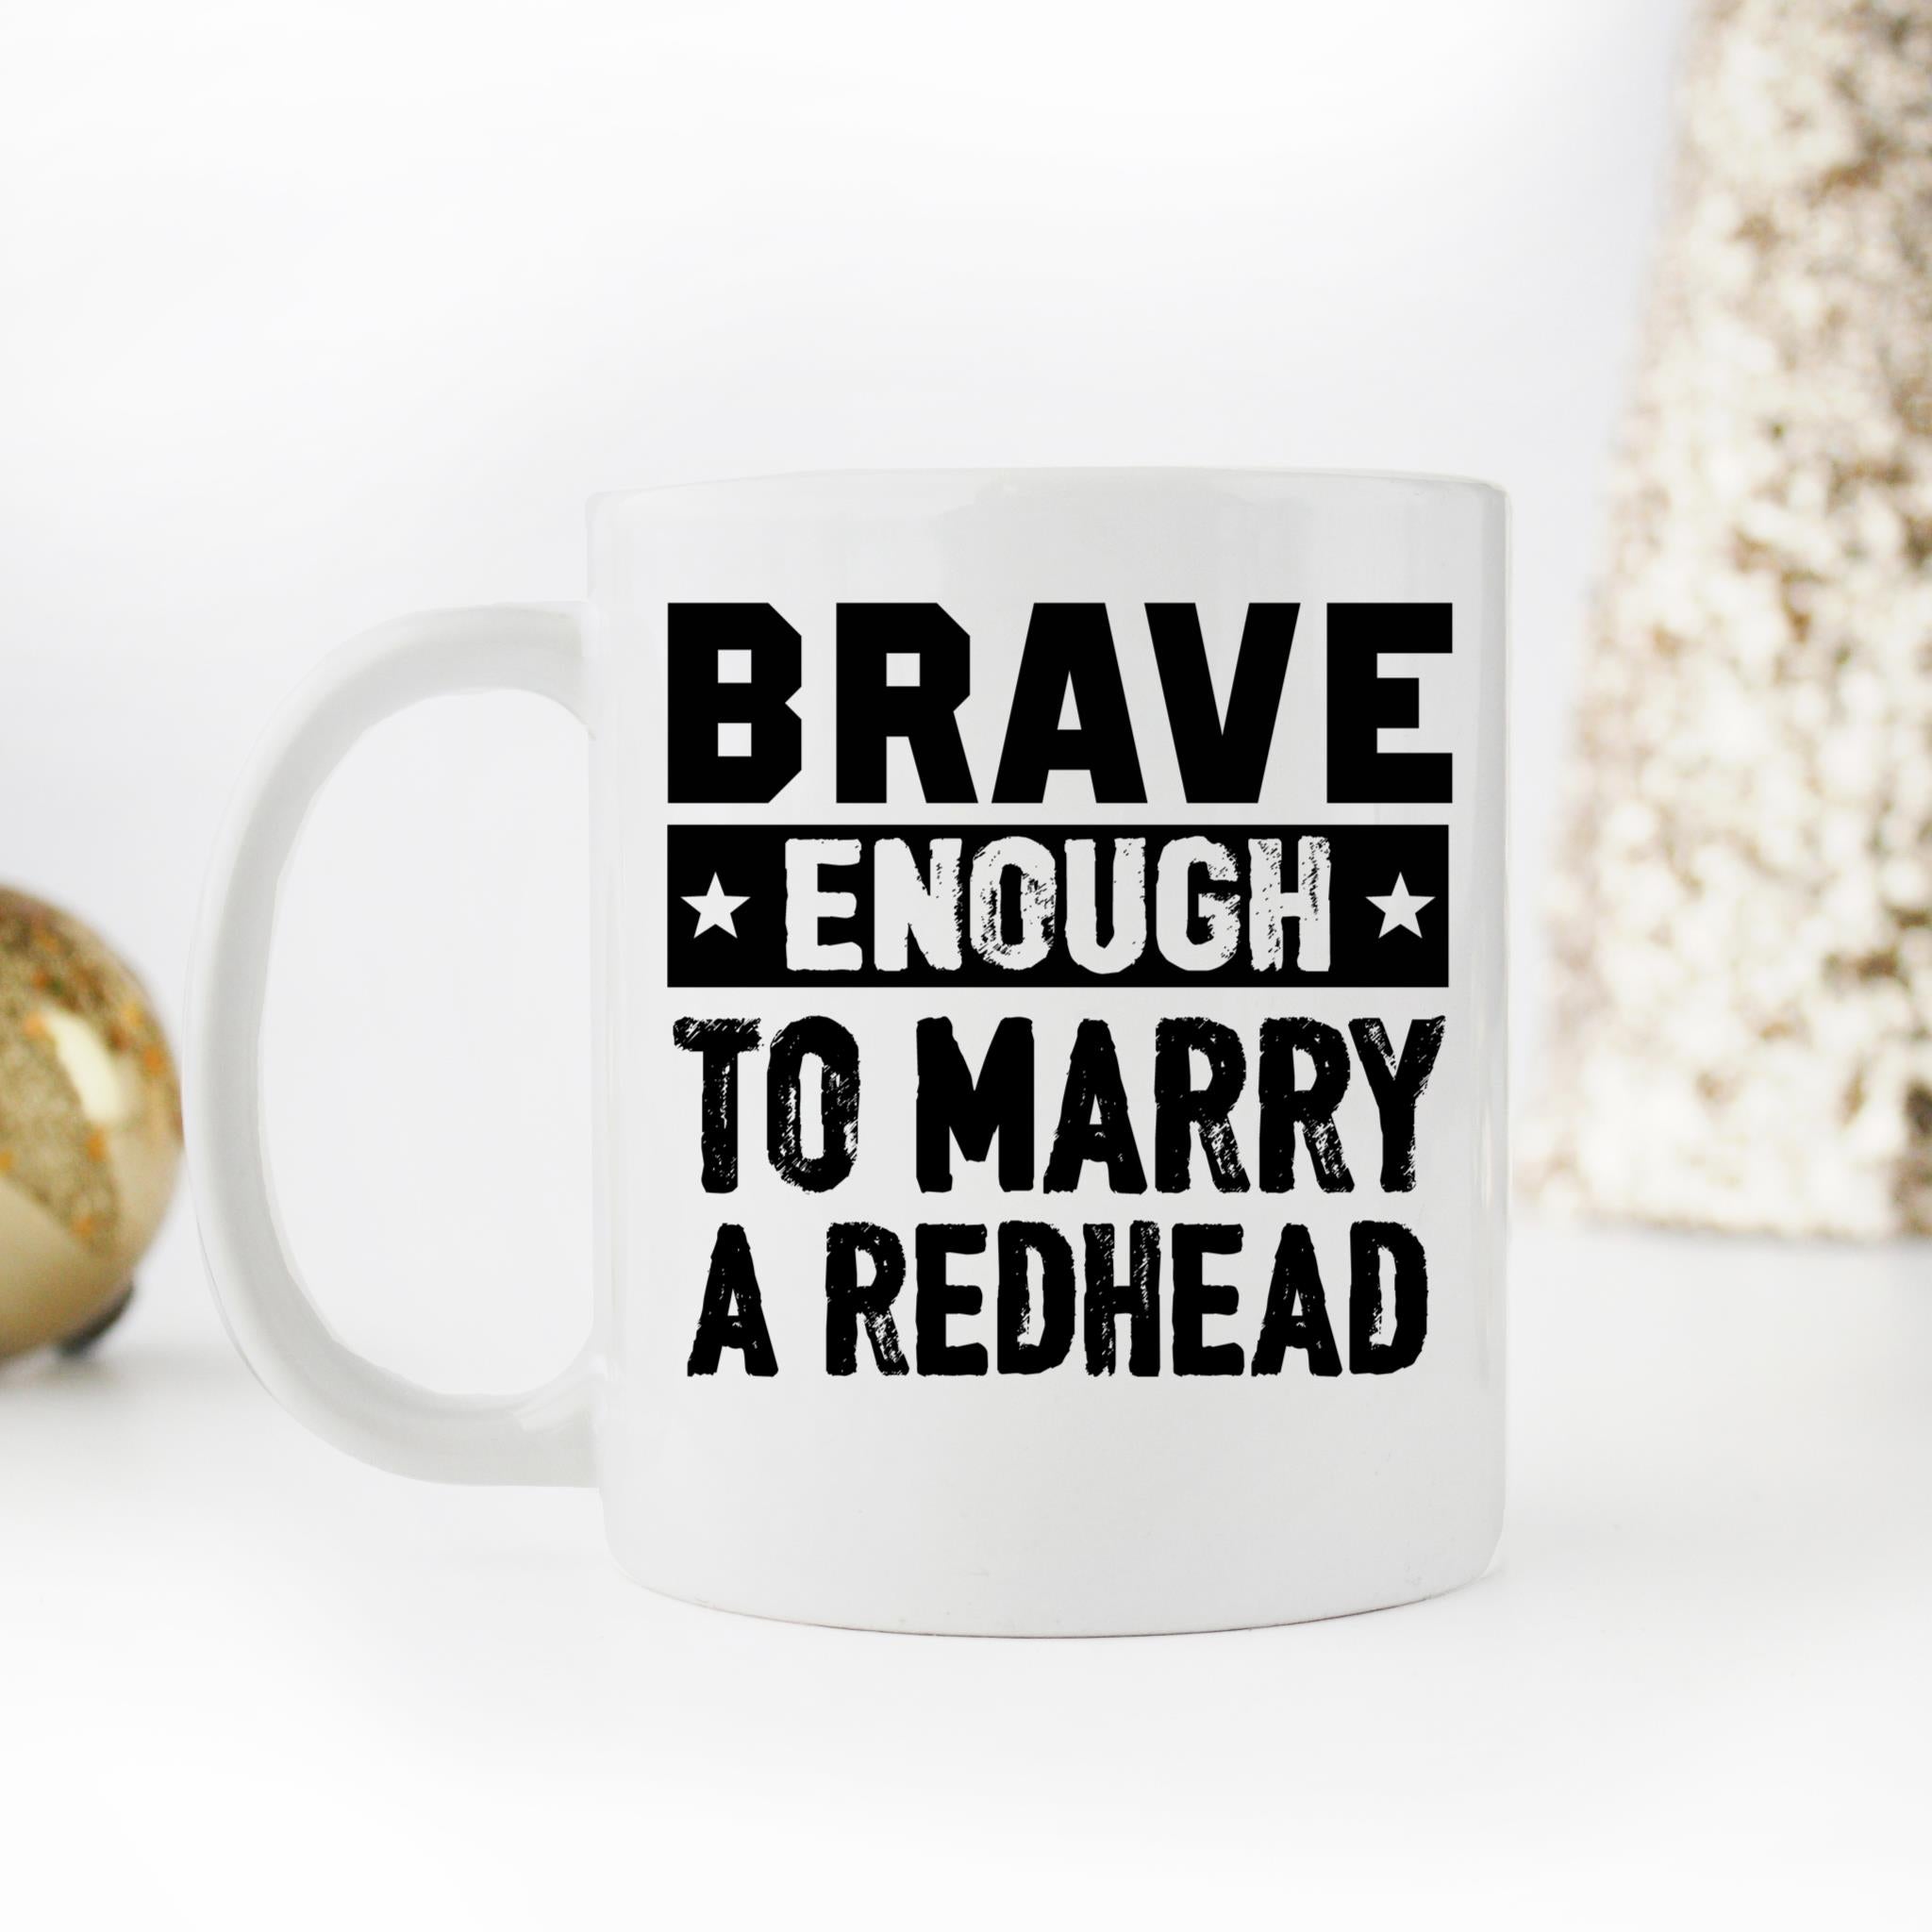 Skitongifts Funny Ceramic Novelty Coffee Mug Brave Enough To Marry A Redhead 4kpiBNW